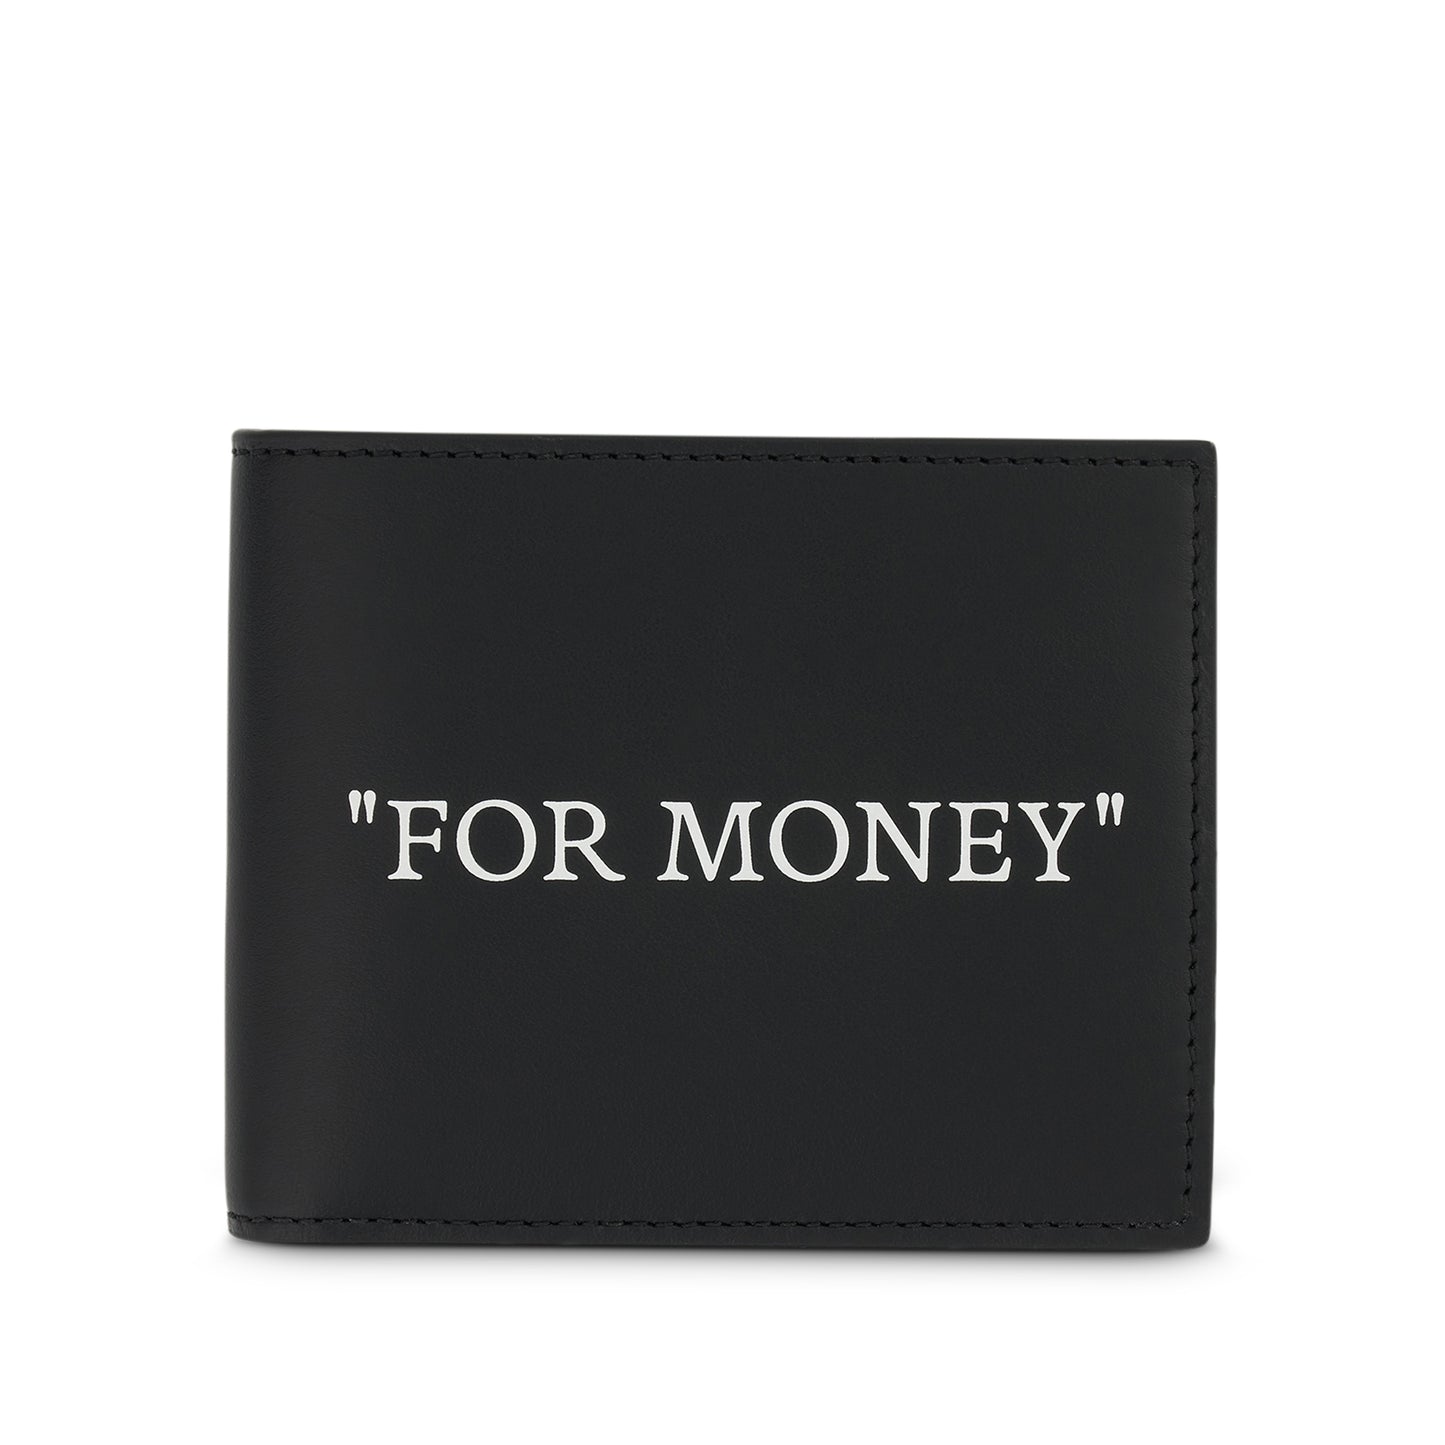 Quote Bookish Bifold in Black